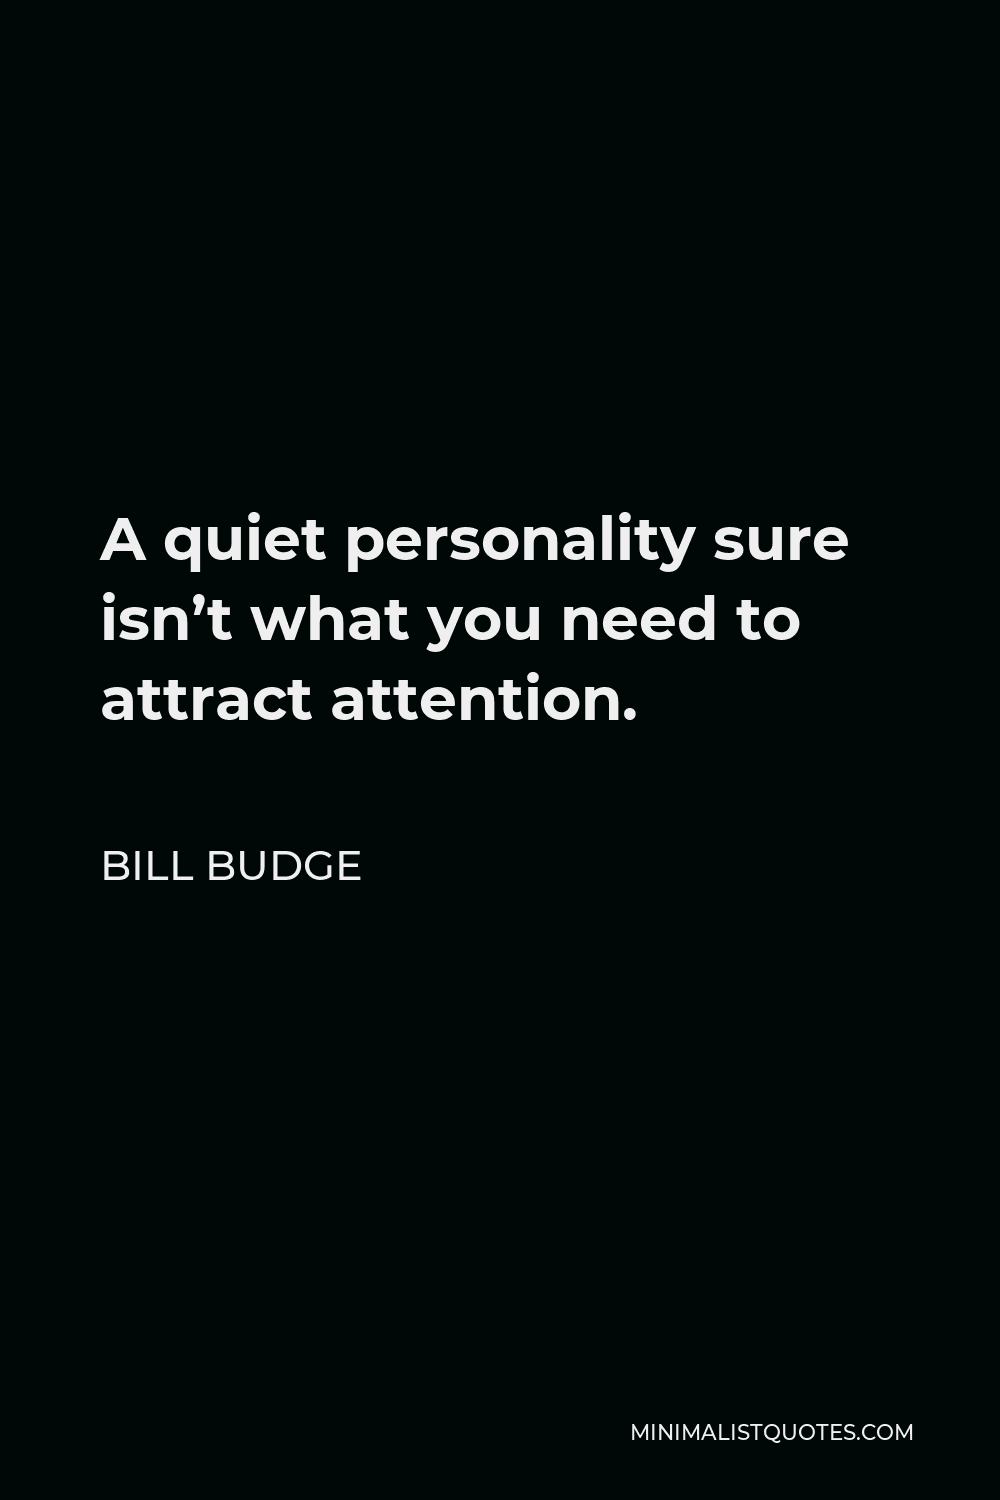 Bill Budge Quote - A quiet personality sure isn’t what you need to attract attention.